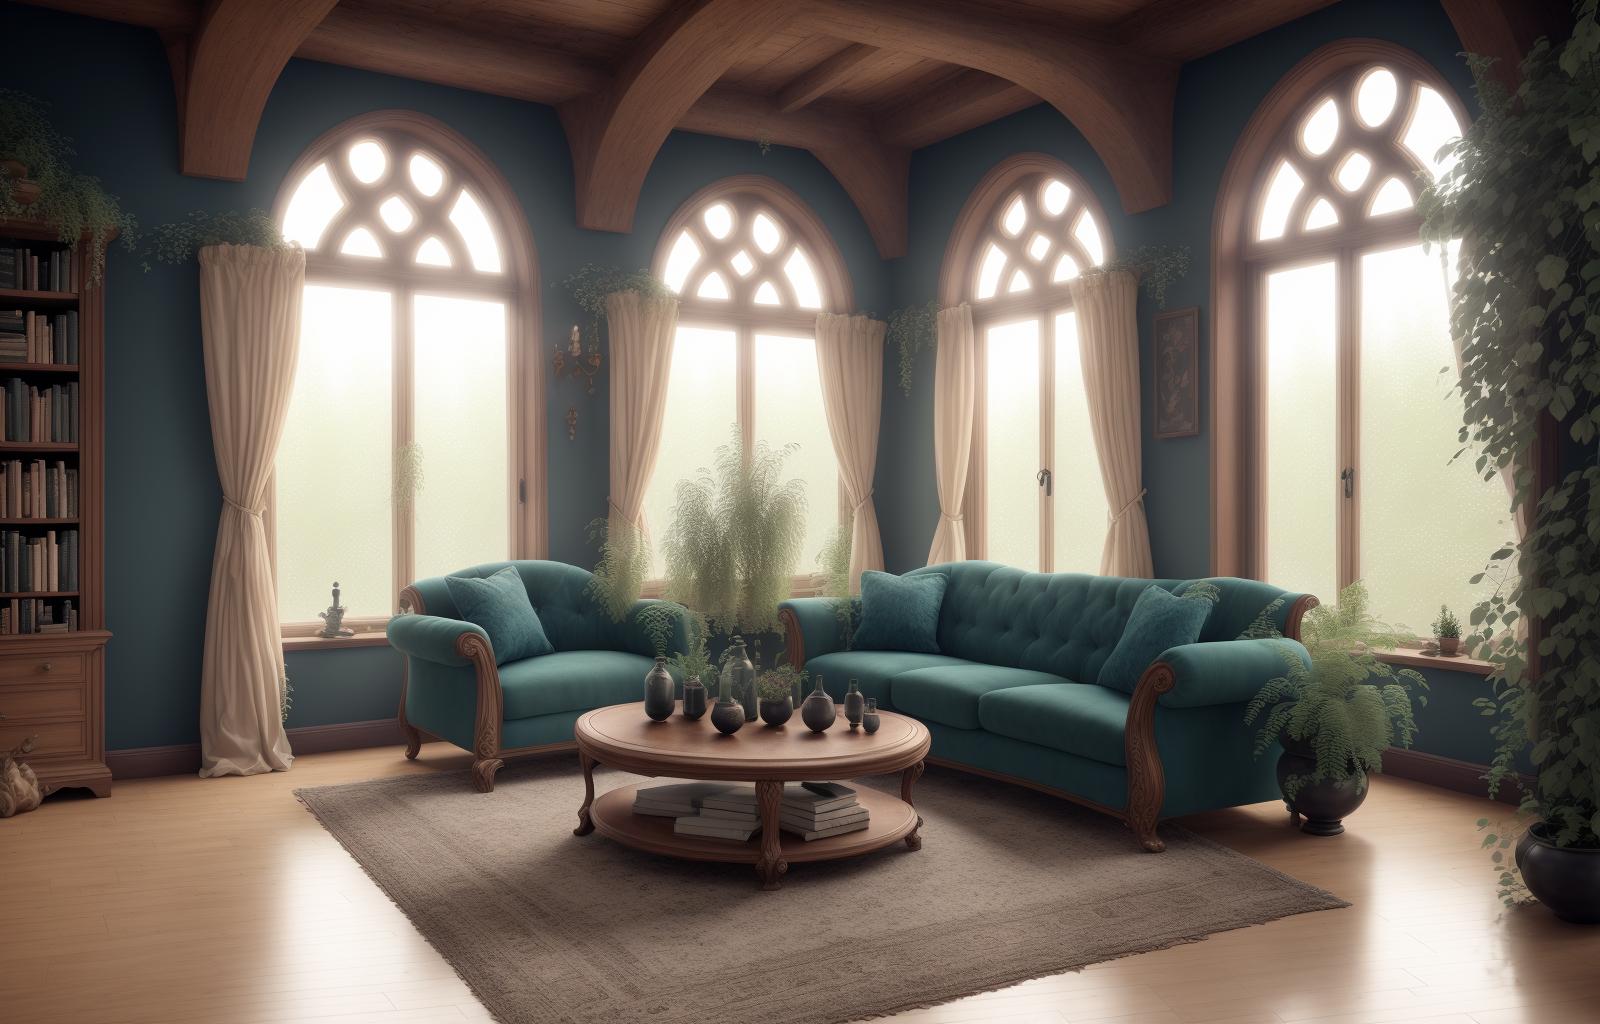 Magical Interior Style: Hobbit inspired living rooms, kitchens, bathrooms and more image by marshall424